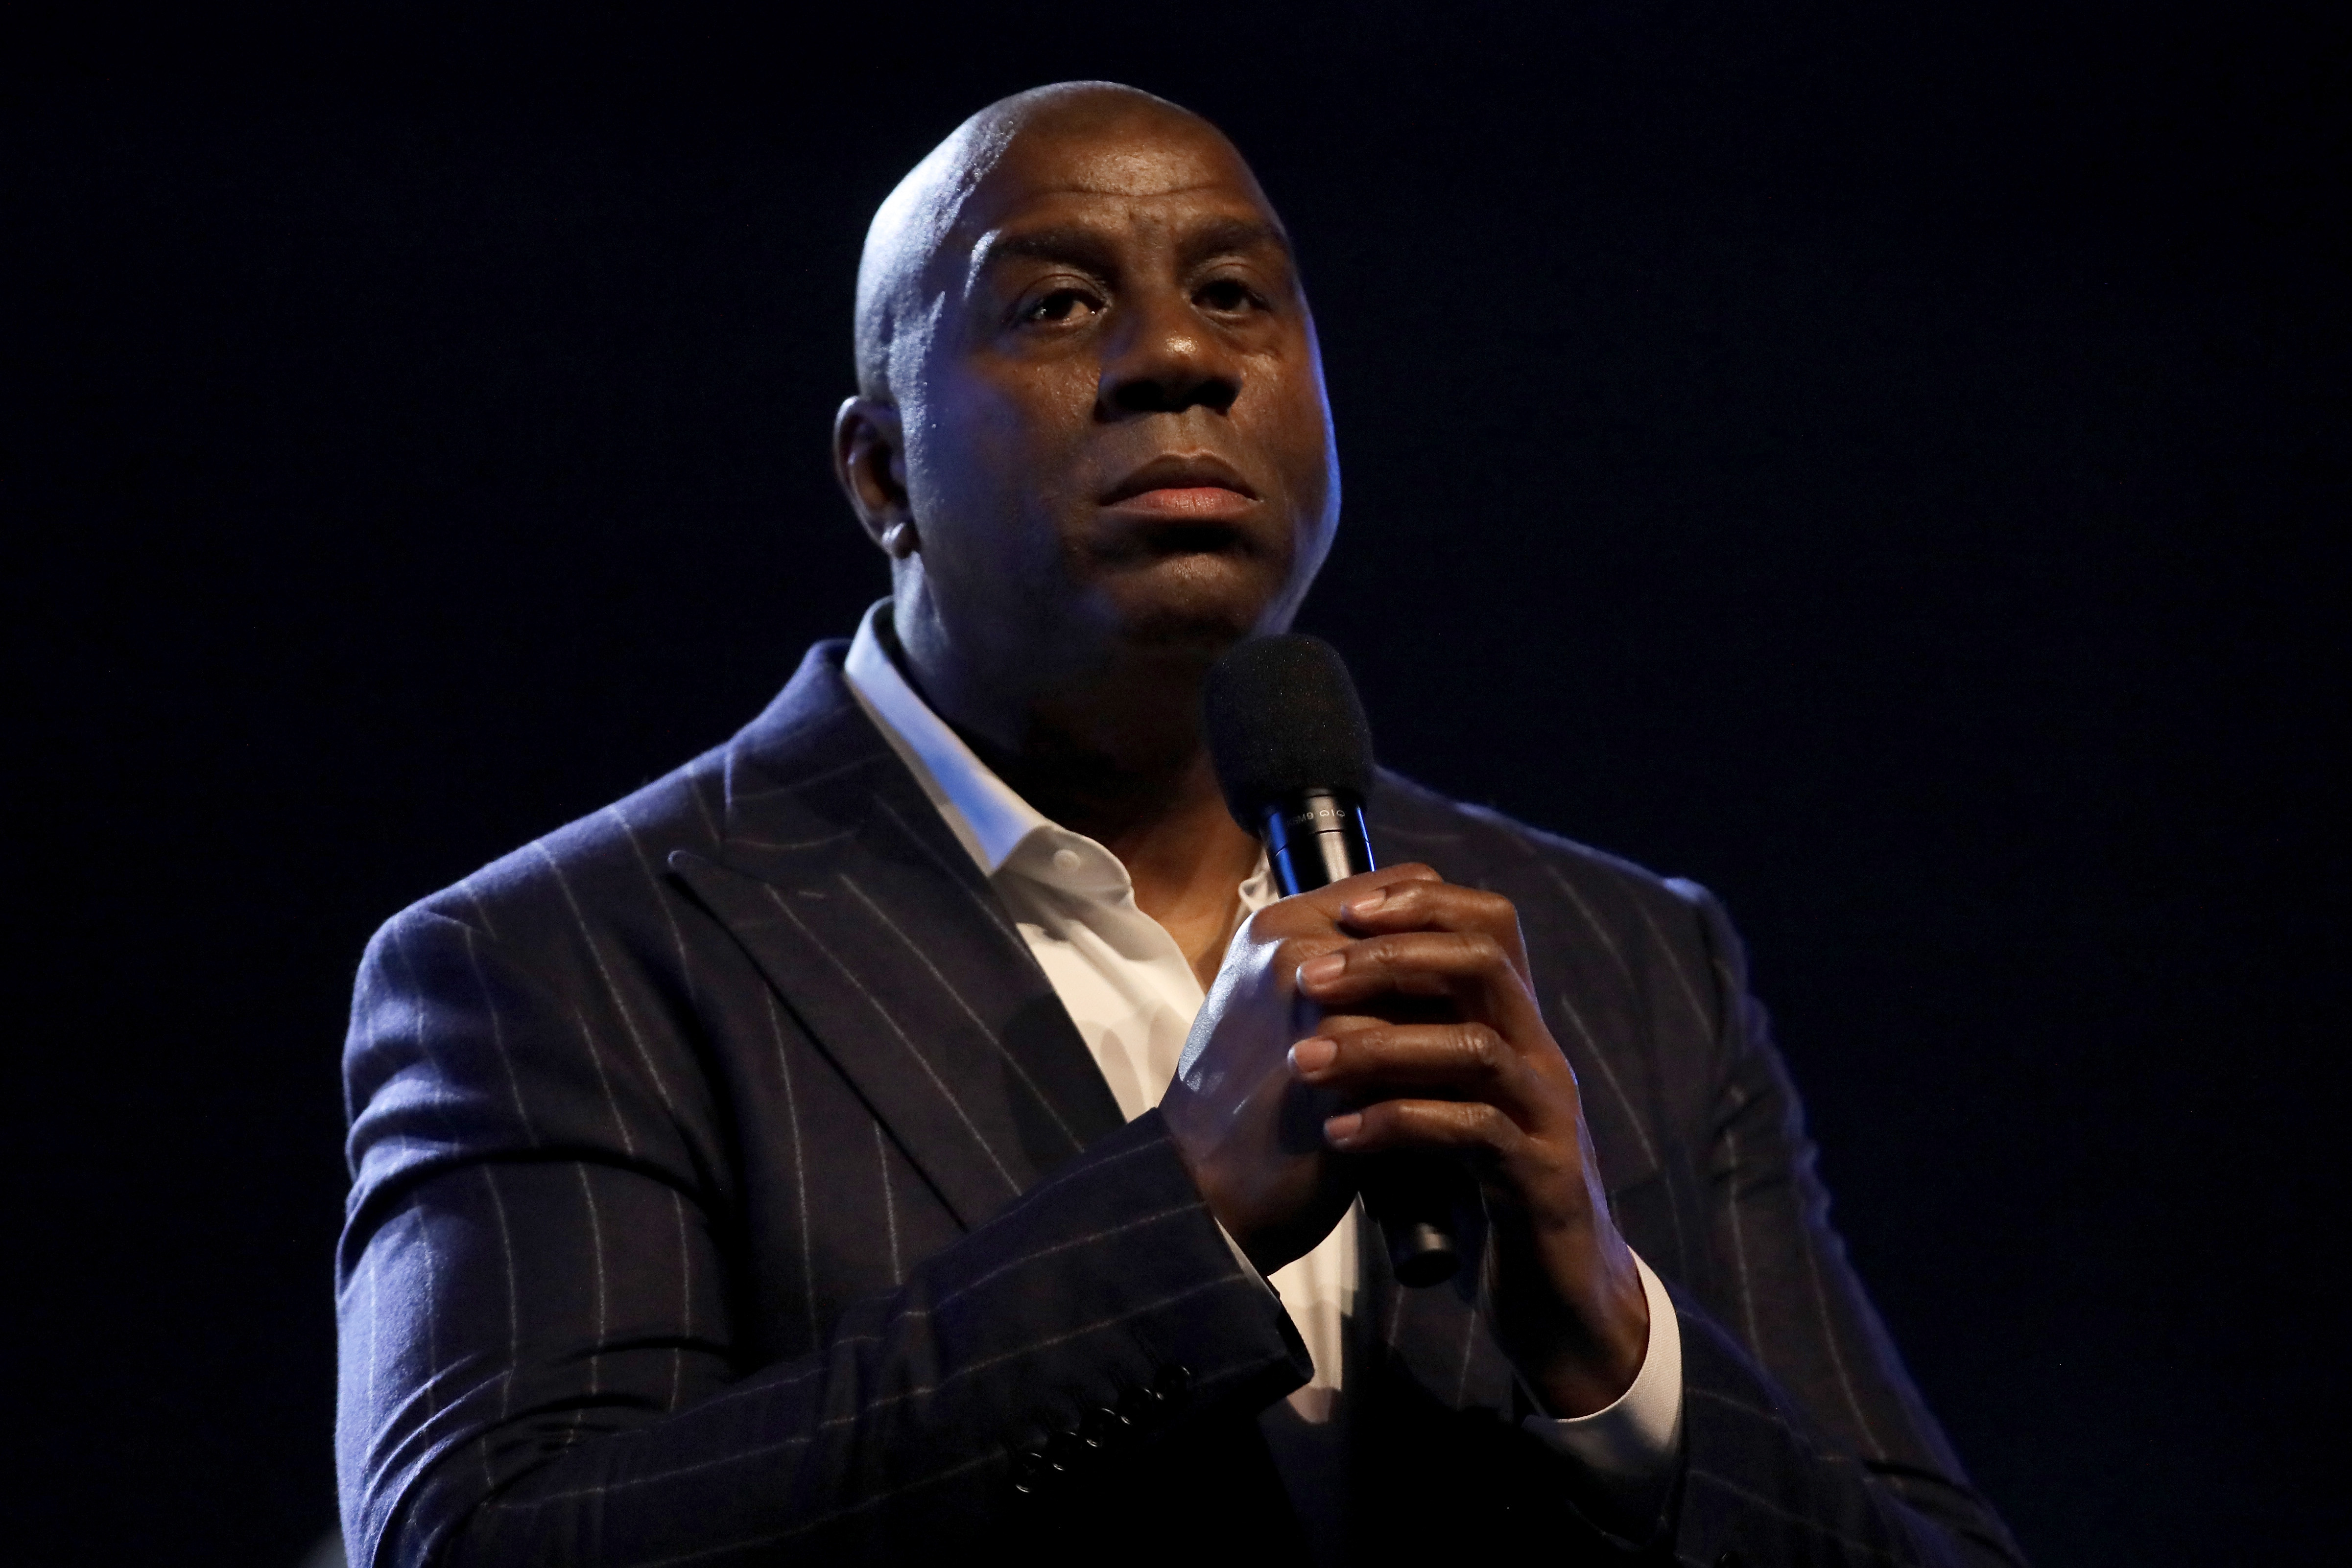 Magic Johnson On Unvaccinated NBA Players: ‘I’d Never Do That To My Teammates’